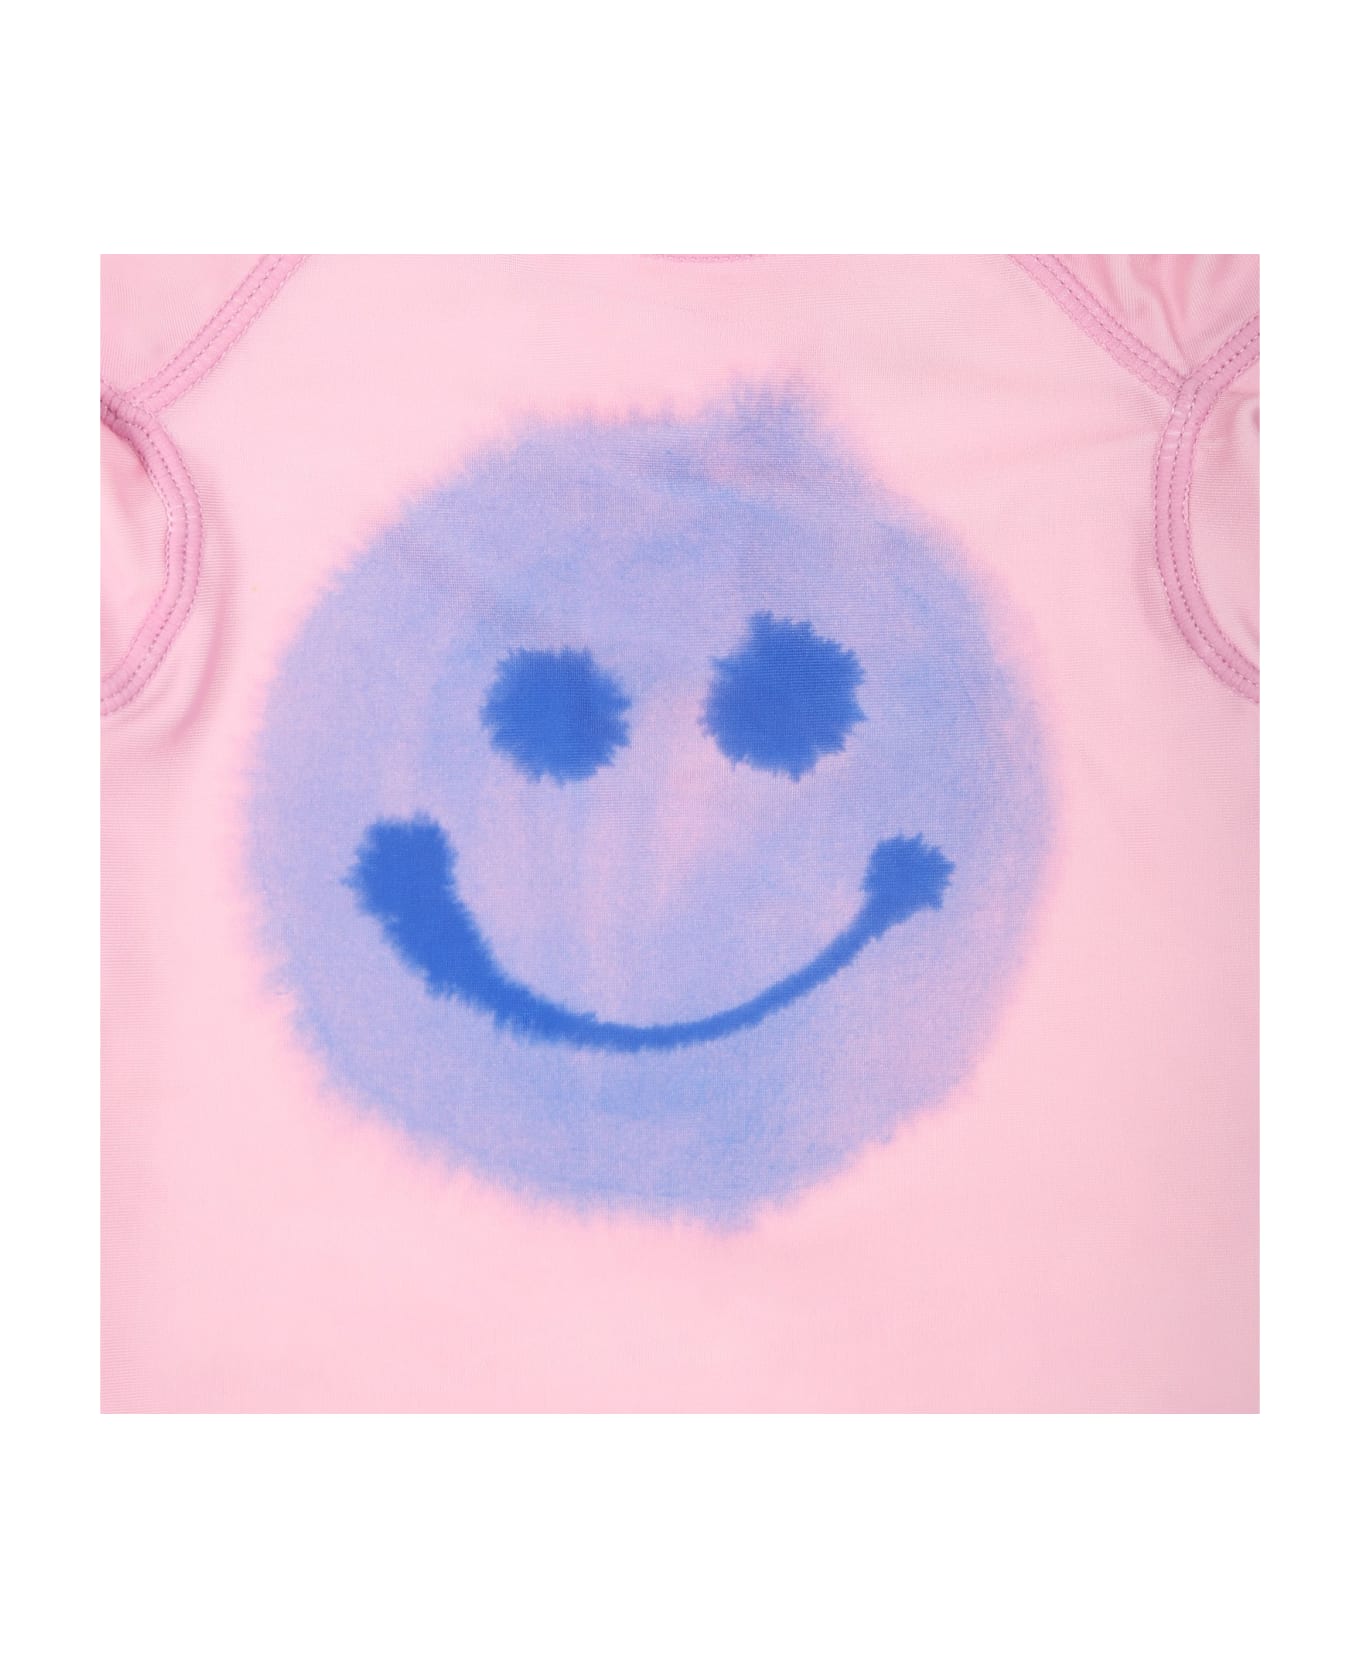 Molo Pink T-shirt For Baby Girl With Smiley - Pink Tシャツ＆ポロシャツ